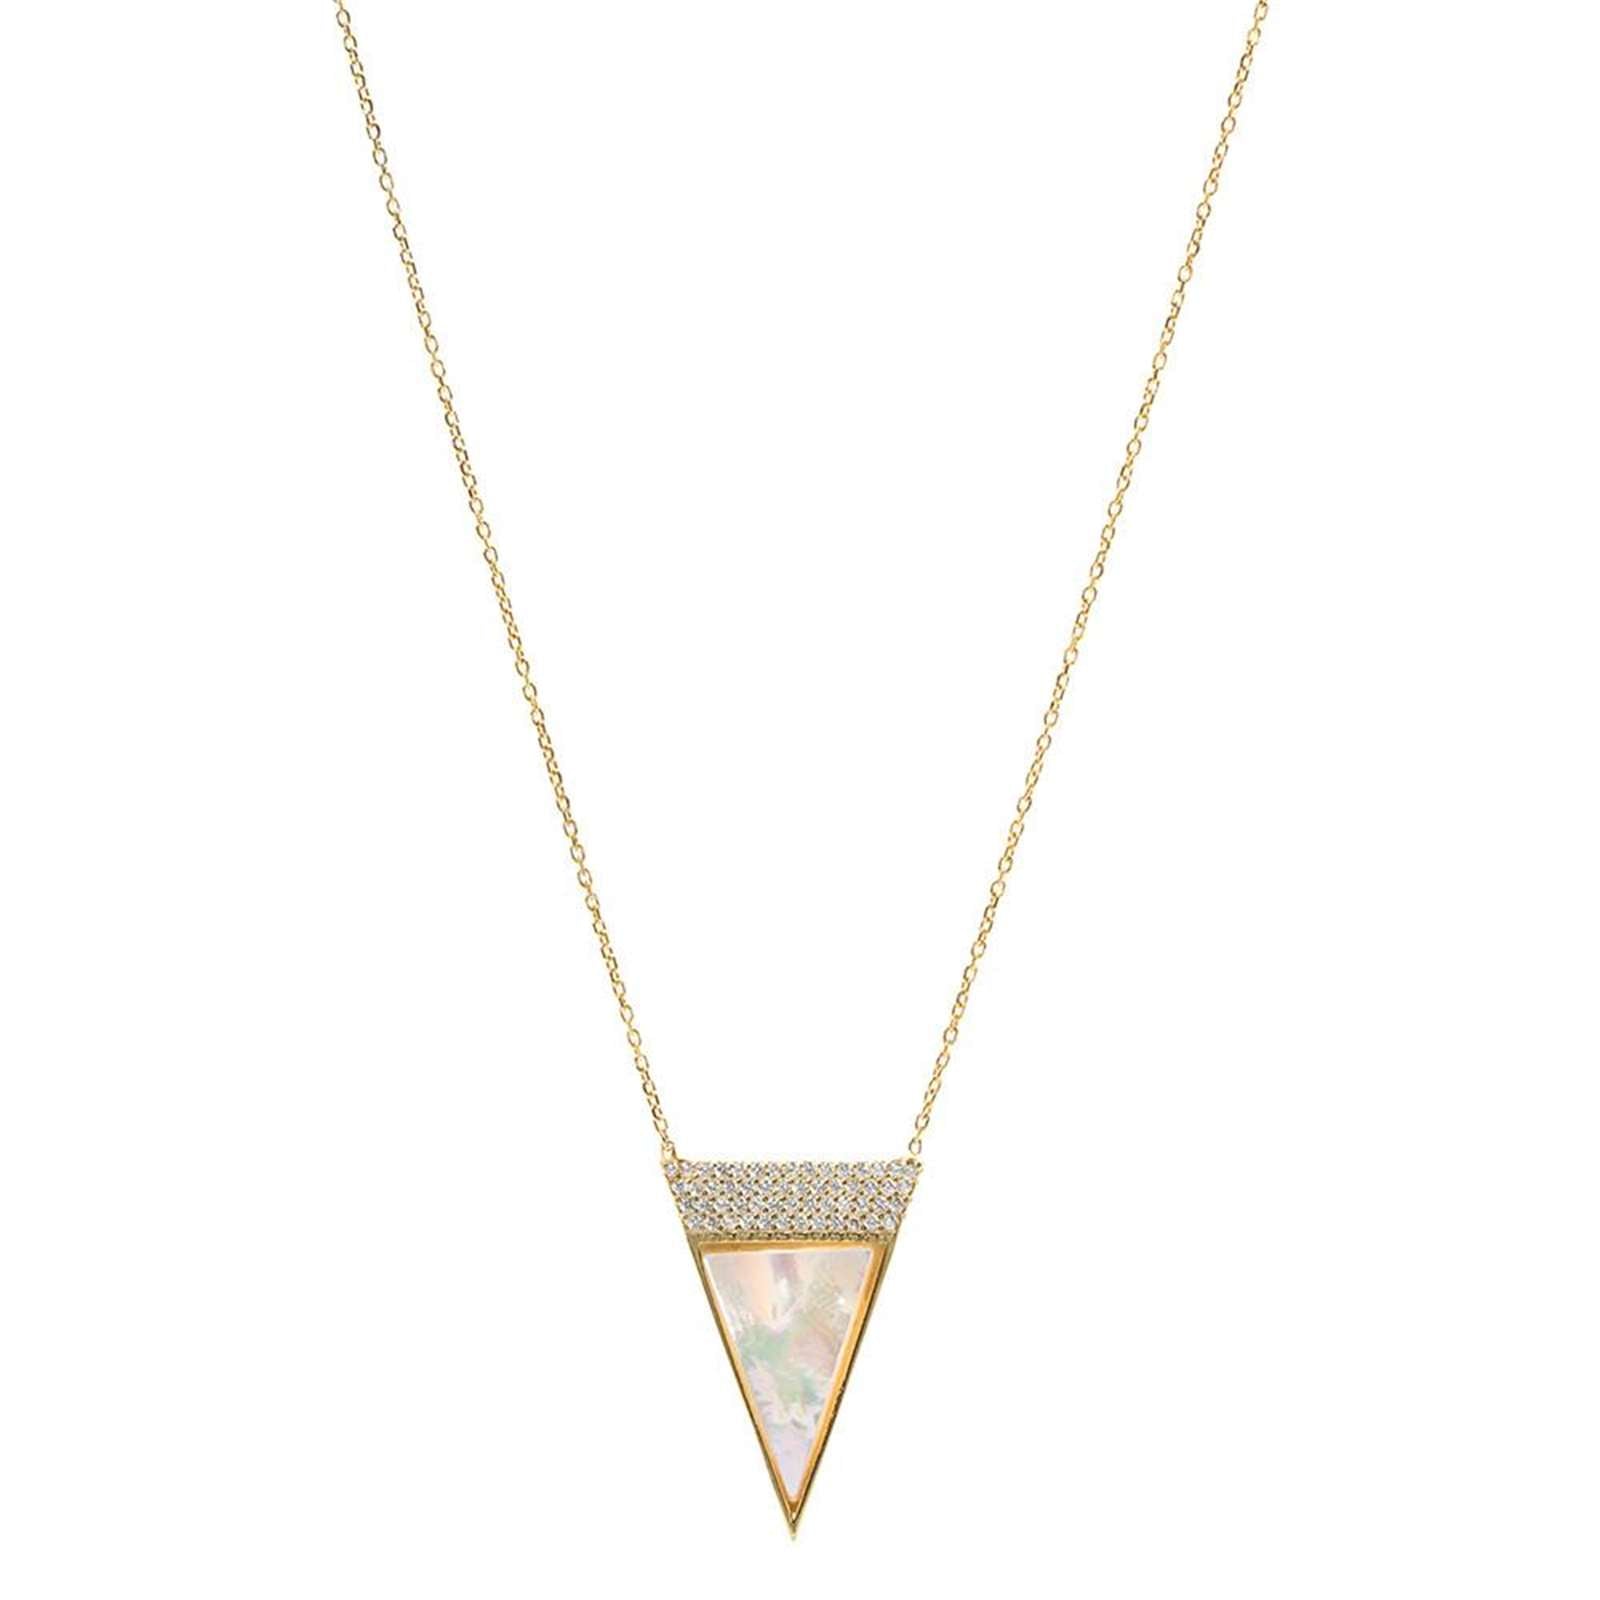 Athra Women Triangle Drop Necklace With Extension